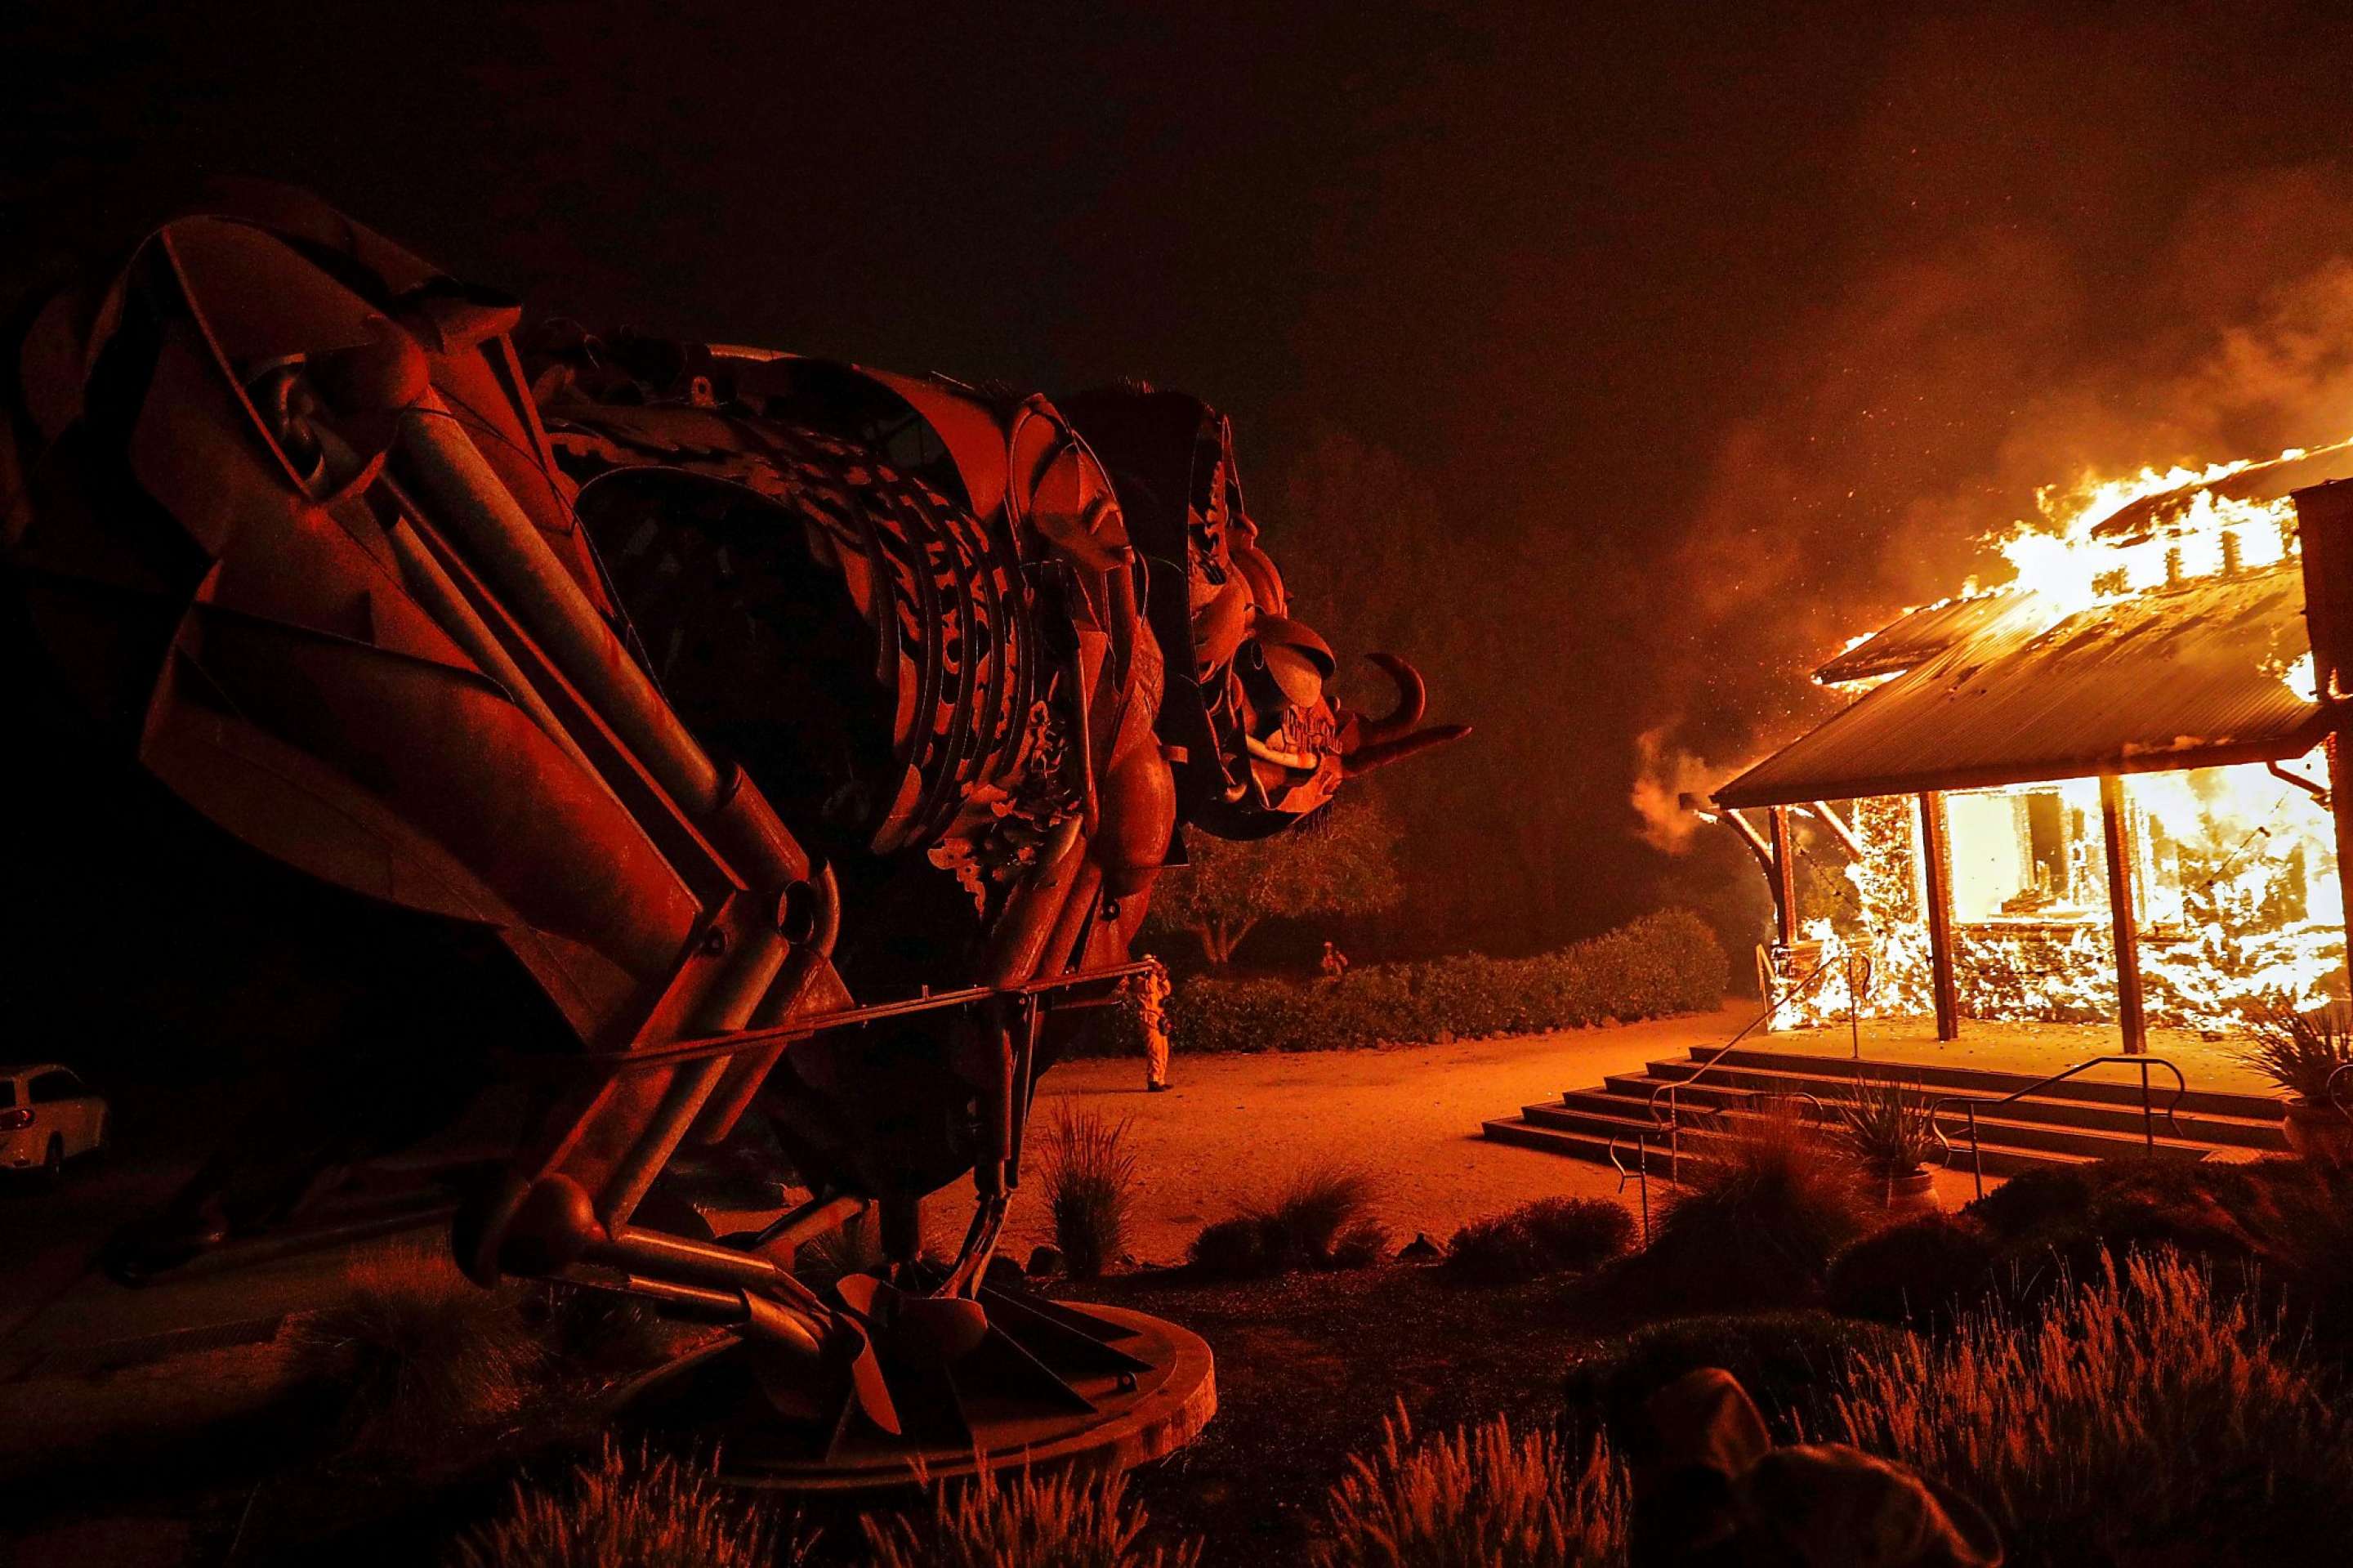 A house burns in the Kincade Fire on 23 October 2019 as a metal sculpture of an animal looks on. Photo: Carlos Avila Gonzalez / SF Chronicle